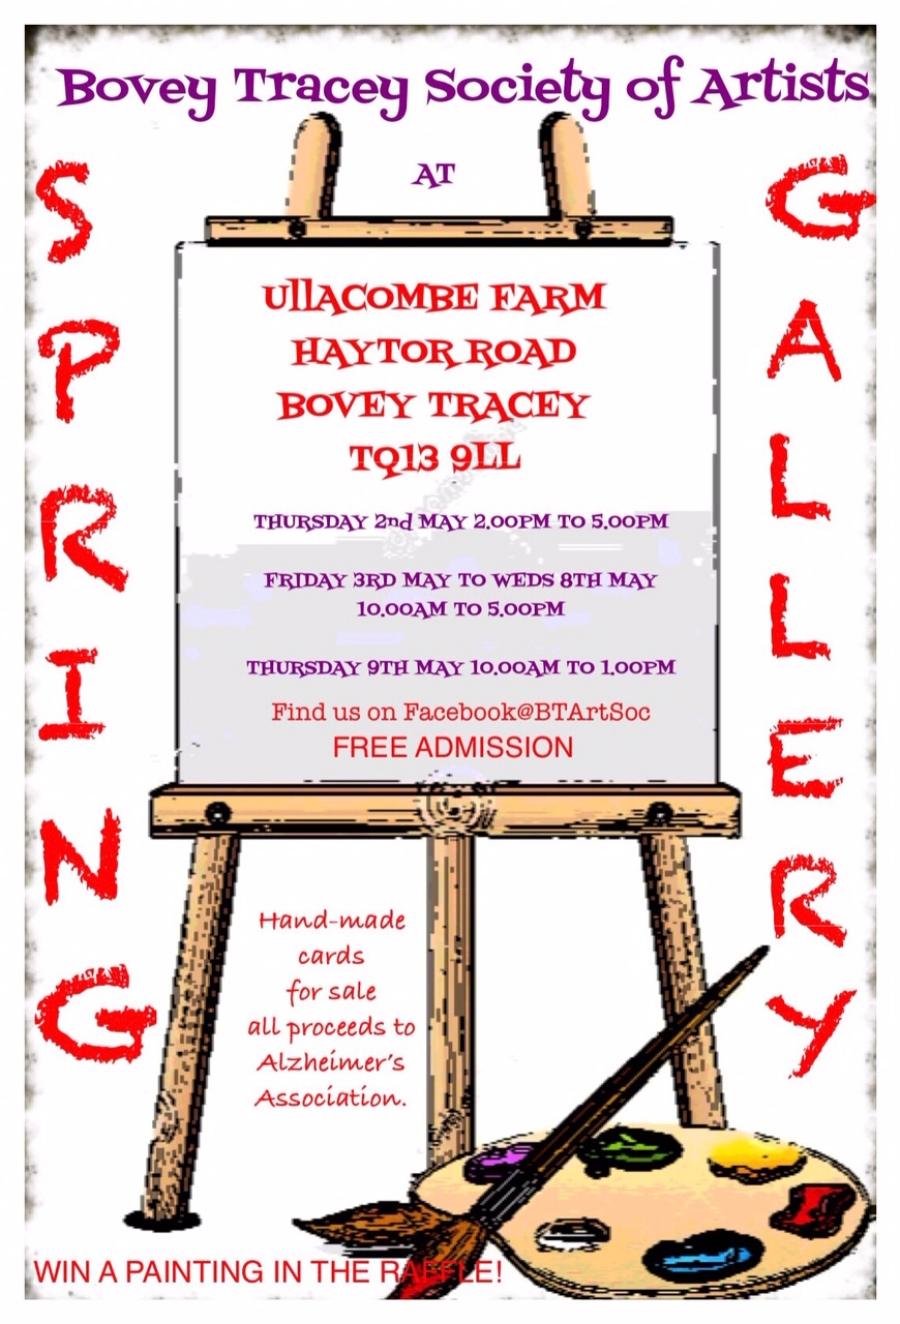 Bovey Tracey Society of Artists SPRING GALLERY image 1